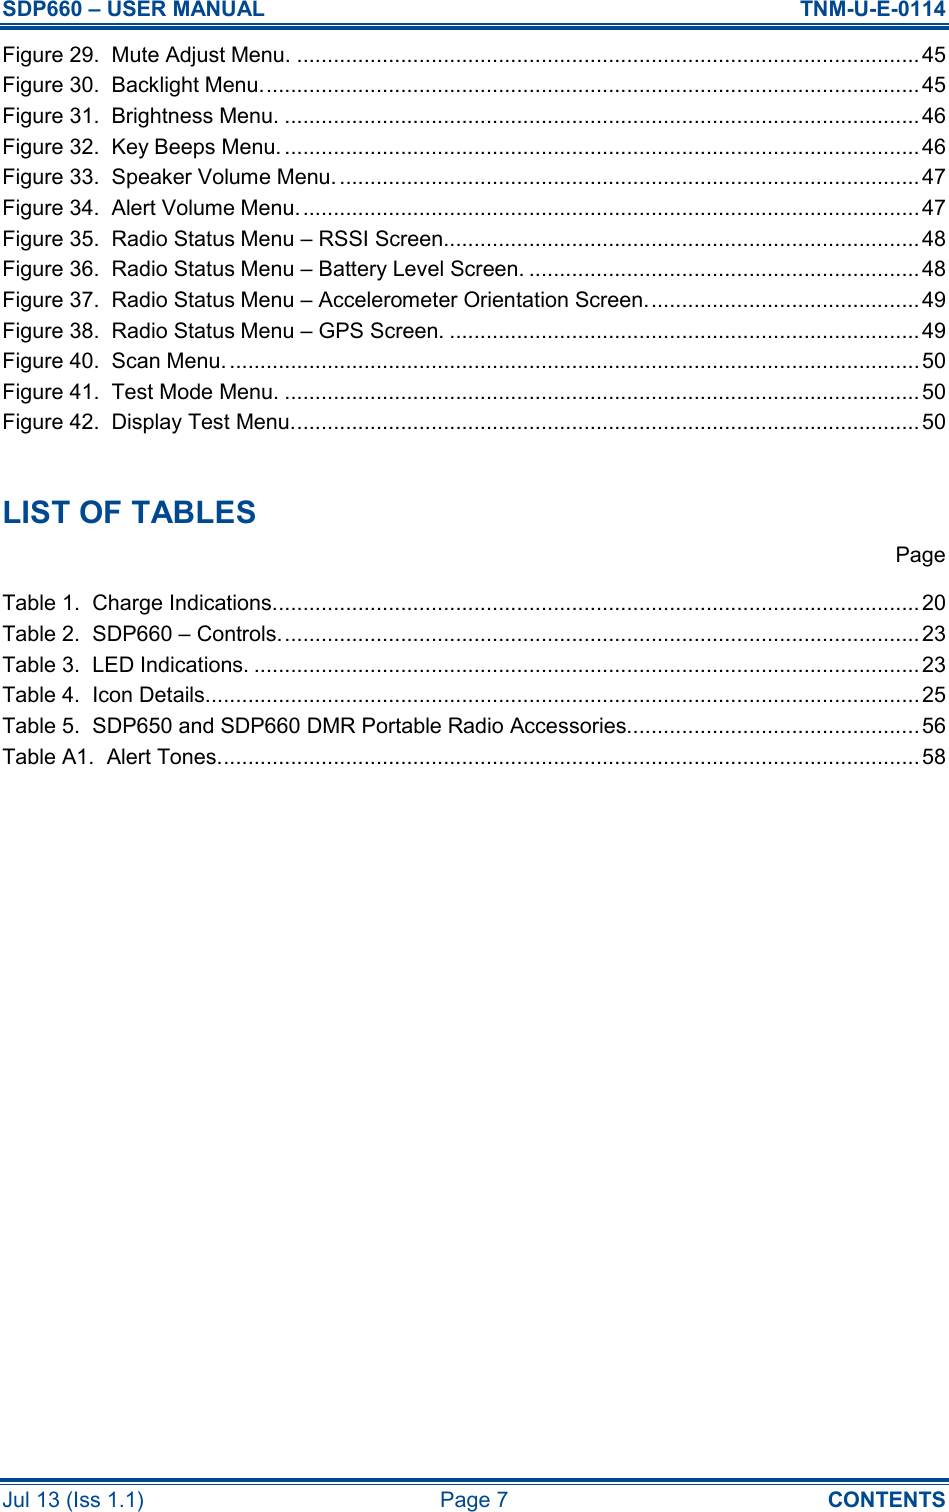 SDP660 – USER MANUAL  TNM-U-E-0114 Jul 13 (Iss 1.1)  Page 7  CONTENTS Figure 29.  Mute Adjust Menu. ...................................................................................................... 45 Figure 30.  Backlight Menu............................................................................................................ 45 Figure 31.  Brightness Menu. ........................................................................................................ 46 Figure 32.  Key Beeps Menu. ........................................................................................................46 Figure 33.  Speaker Volume Menu................................................................................................47 Figure 34.  Alert Volume Menu...................................................................................................... 47 Figure 35.  Radio Status Menu – RSSI Screen.............................................................................. 48 Figure 36.  Radio Status Menu – Battery Level Screen. ................................................................ 48 Figure 37.  Radio Status Menu – Accelerometer Orientation Screen............................................. 49 Figure 38.  Radio Status Menu – GPS Screen. ............................................................................. 49 Figure 40.  Scan Menu. .................................................................................................................50 Figure 41.  Test Mode Menu. ........................................................................................................ 50 Figure 42.  Display Test Menu....................................................................................................... 50  LIST OF TABLES   Page Table 1.  Charge Indications.......................................................................................................... 20 Table 2.  SDP660 – Controls......................................................................................................... 23 Table 3.  LED Indications. ............................................................................................................. 23 Table 4.  Icon Details..................................................................................................................... 25 Table 5.  SDP650 and SDP660 DMR Portable Radio Accessories................................................56 Table A1.  Alert Tones................................................................................................................... 58     